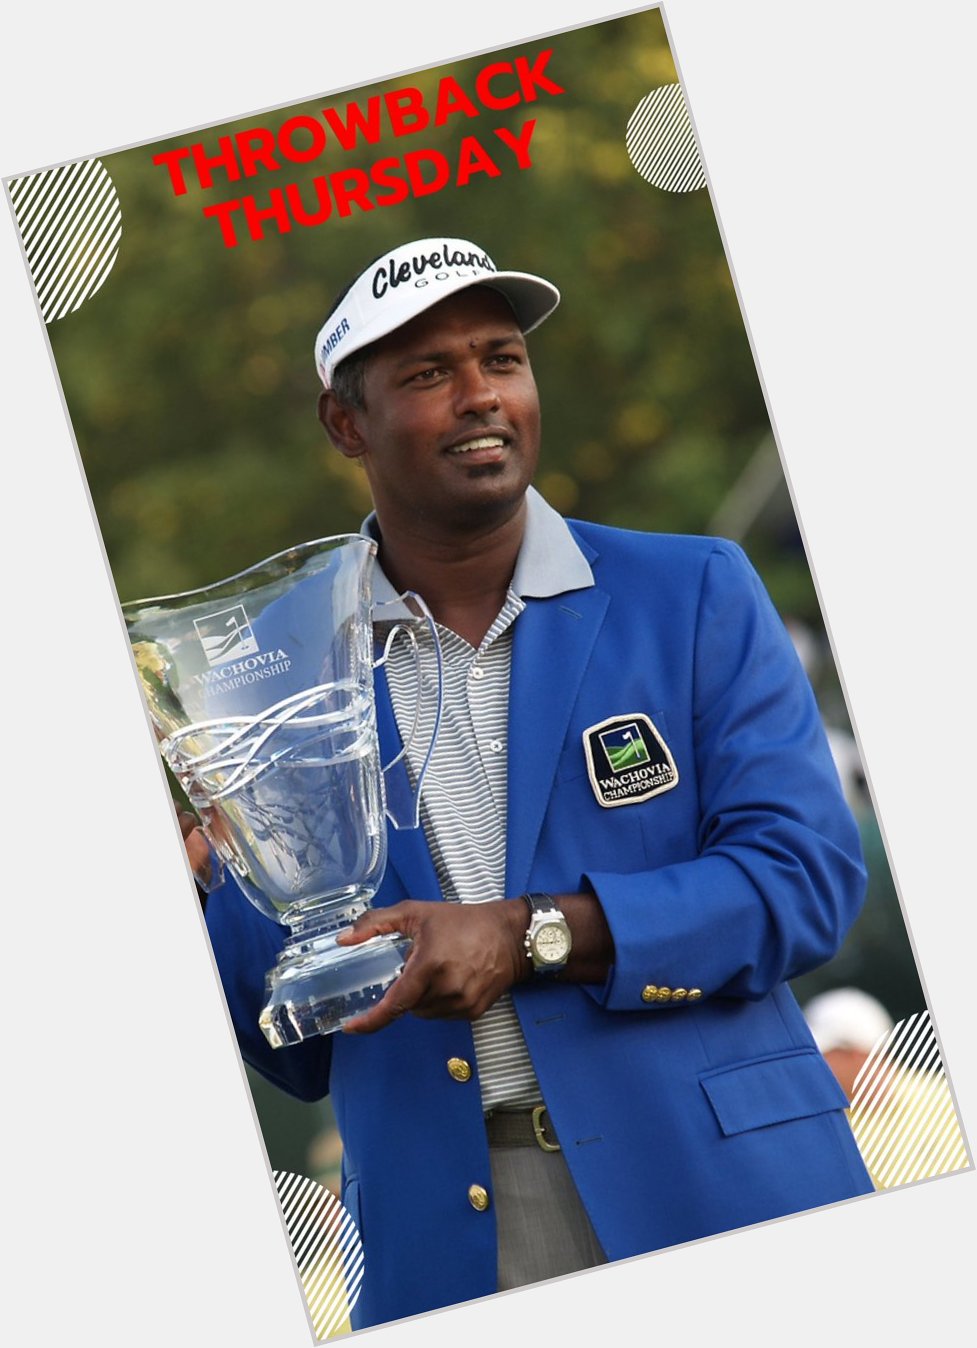 TBT to when Vijay Singh was our 2005 Champion! We d also like to wish him an early Happy Birthday!  